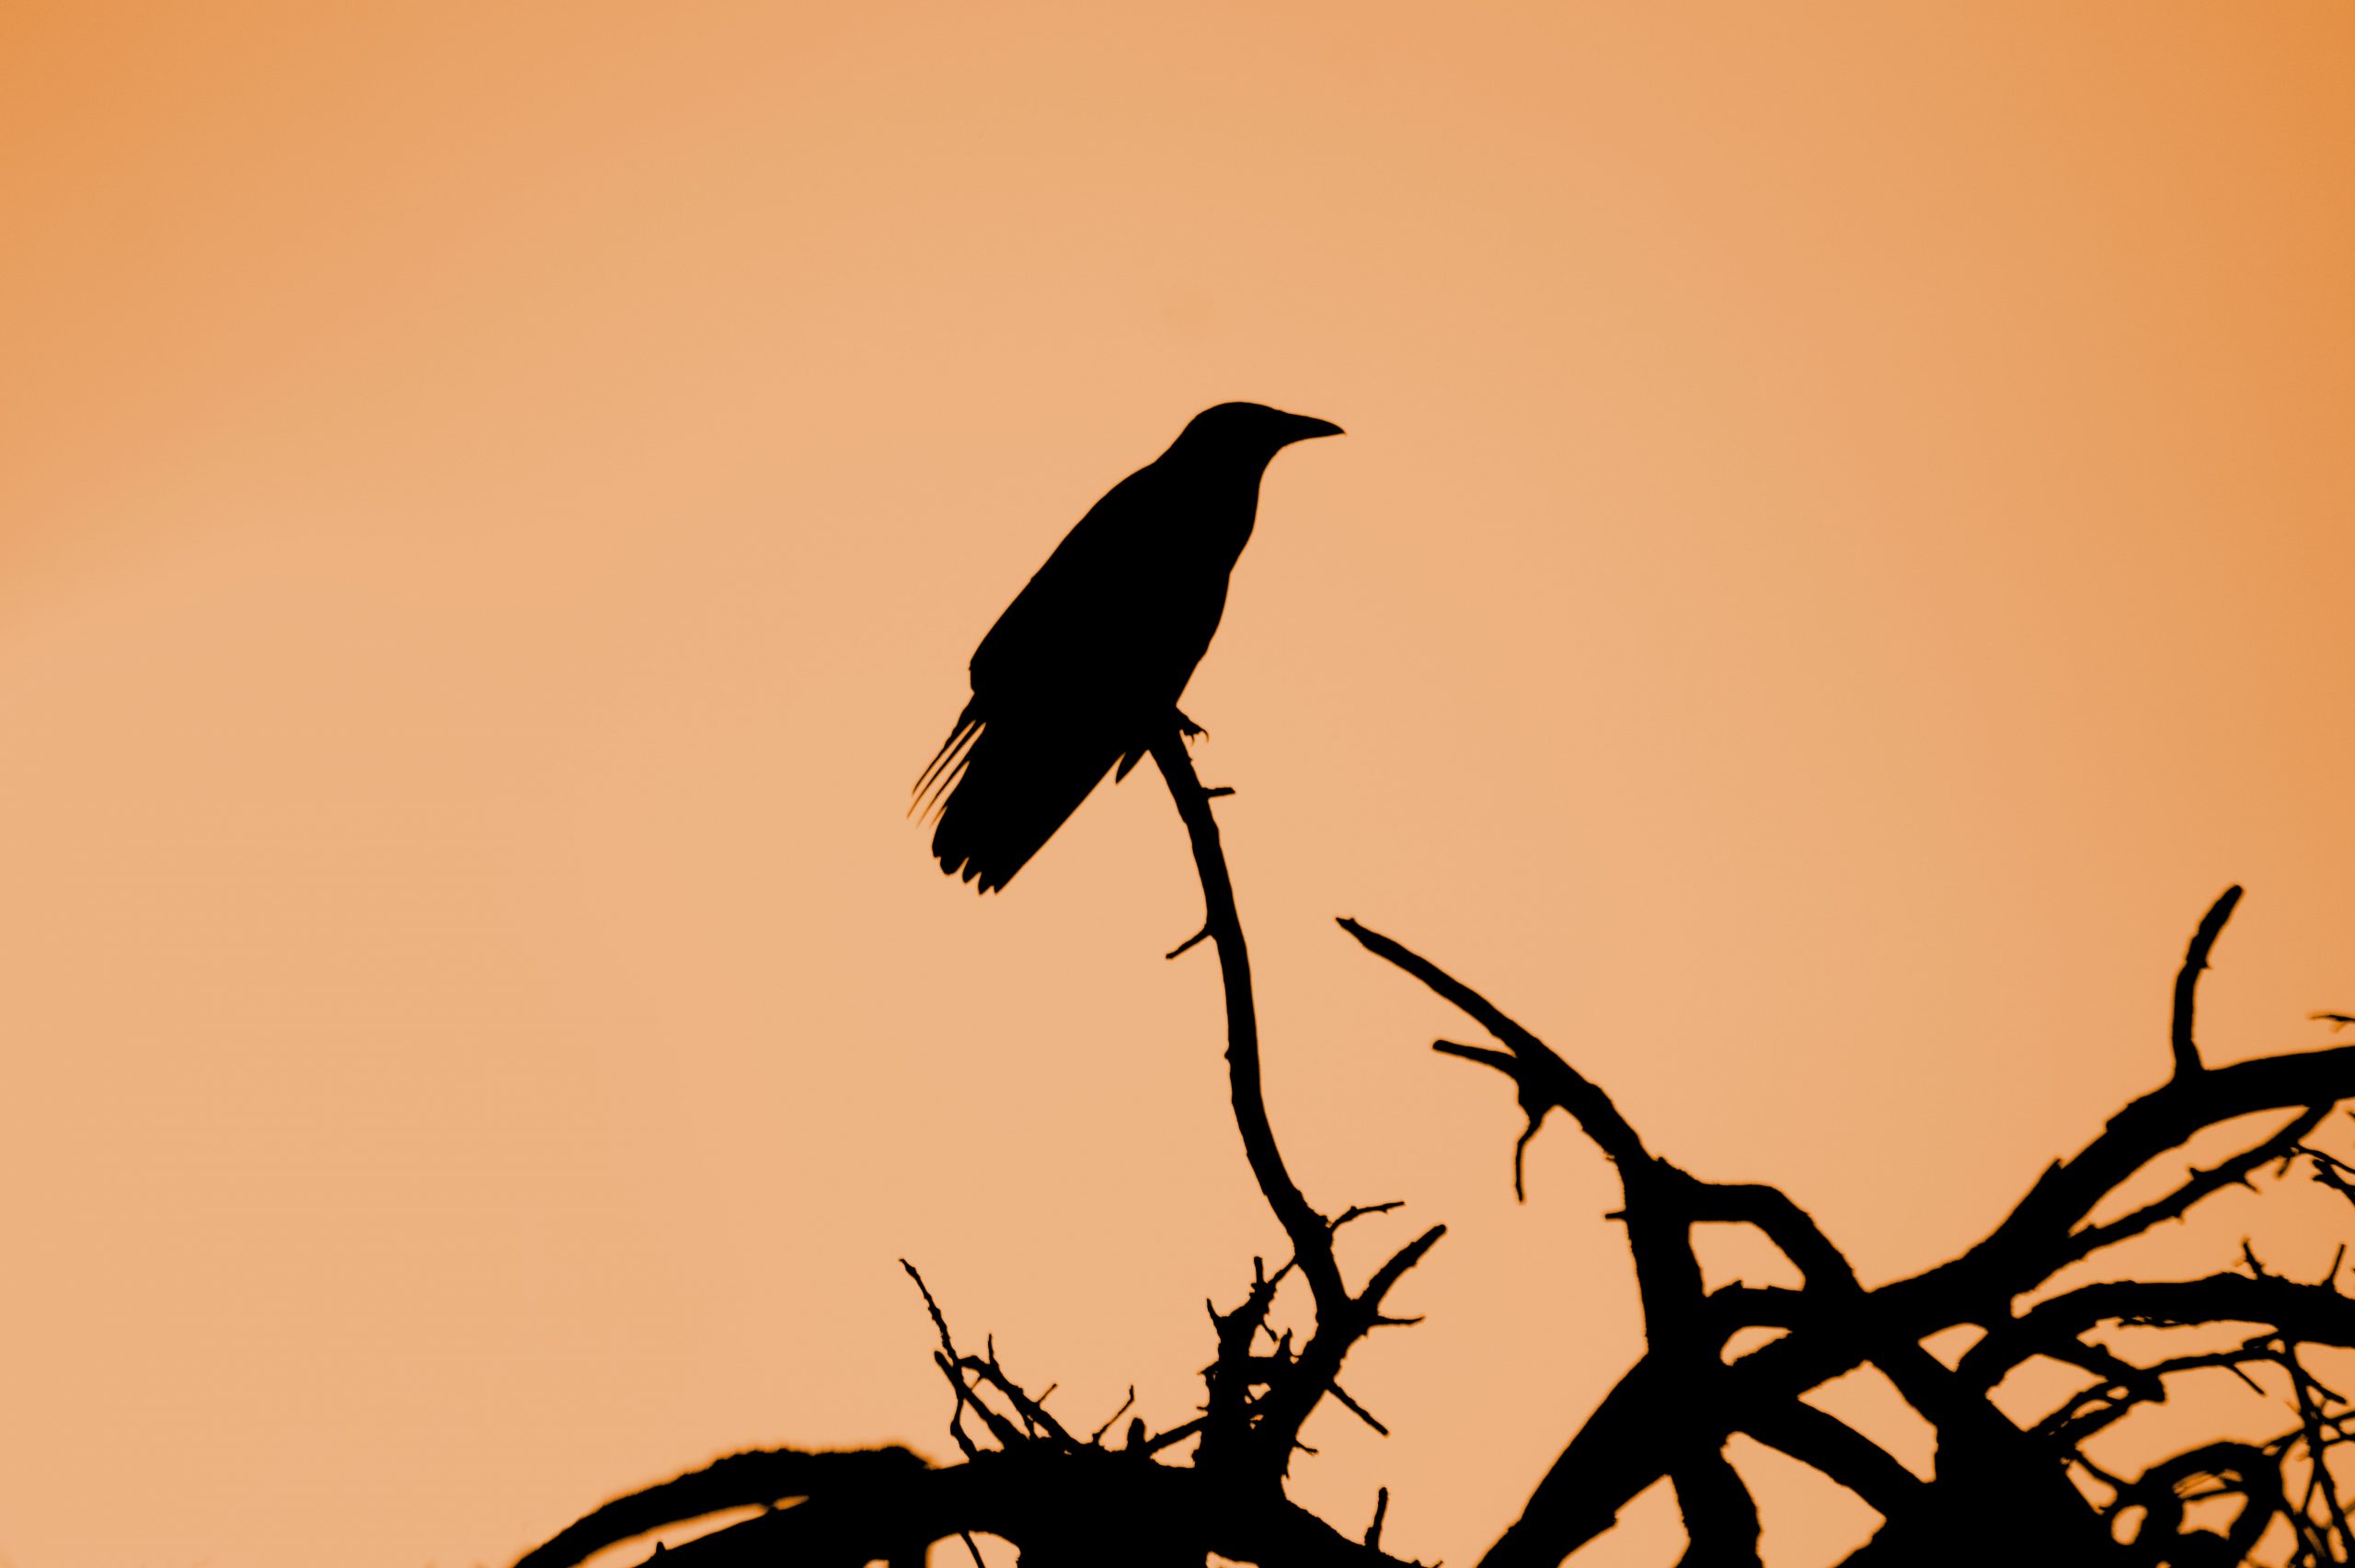 A silhouette of a crow standing on pointy branches, backlit by a pale orange sky.